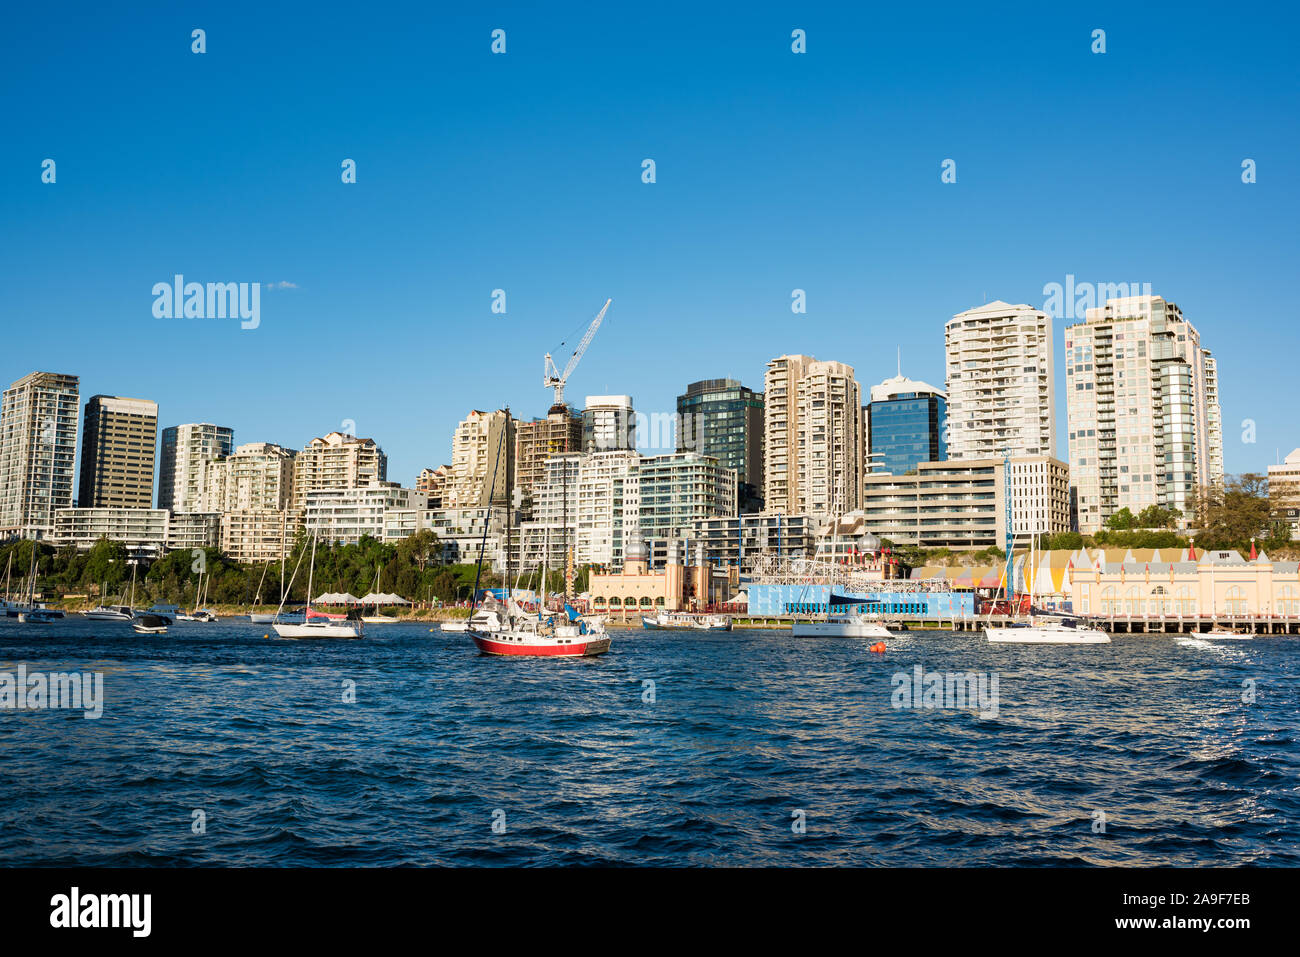 Milsons point and Lavender bay with yachts. Sydney, Australia Stock Photo